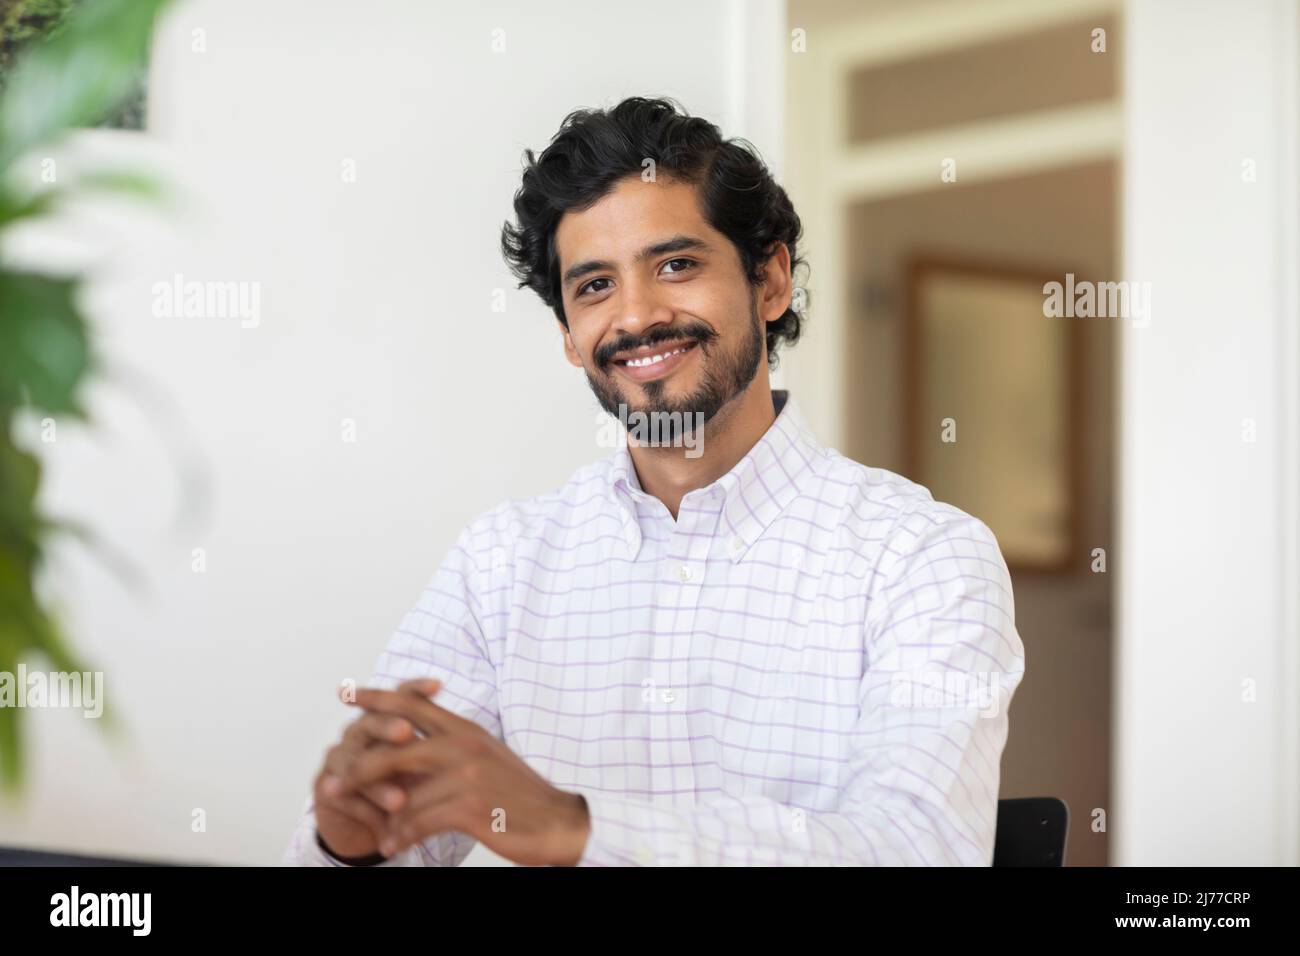 young man working as manager in an office Stock Photo